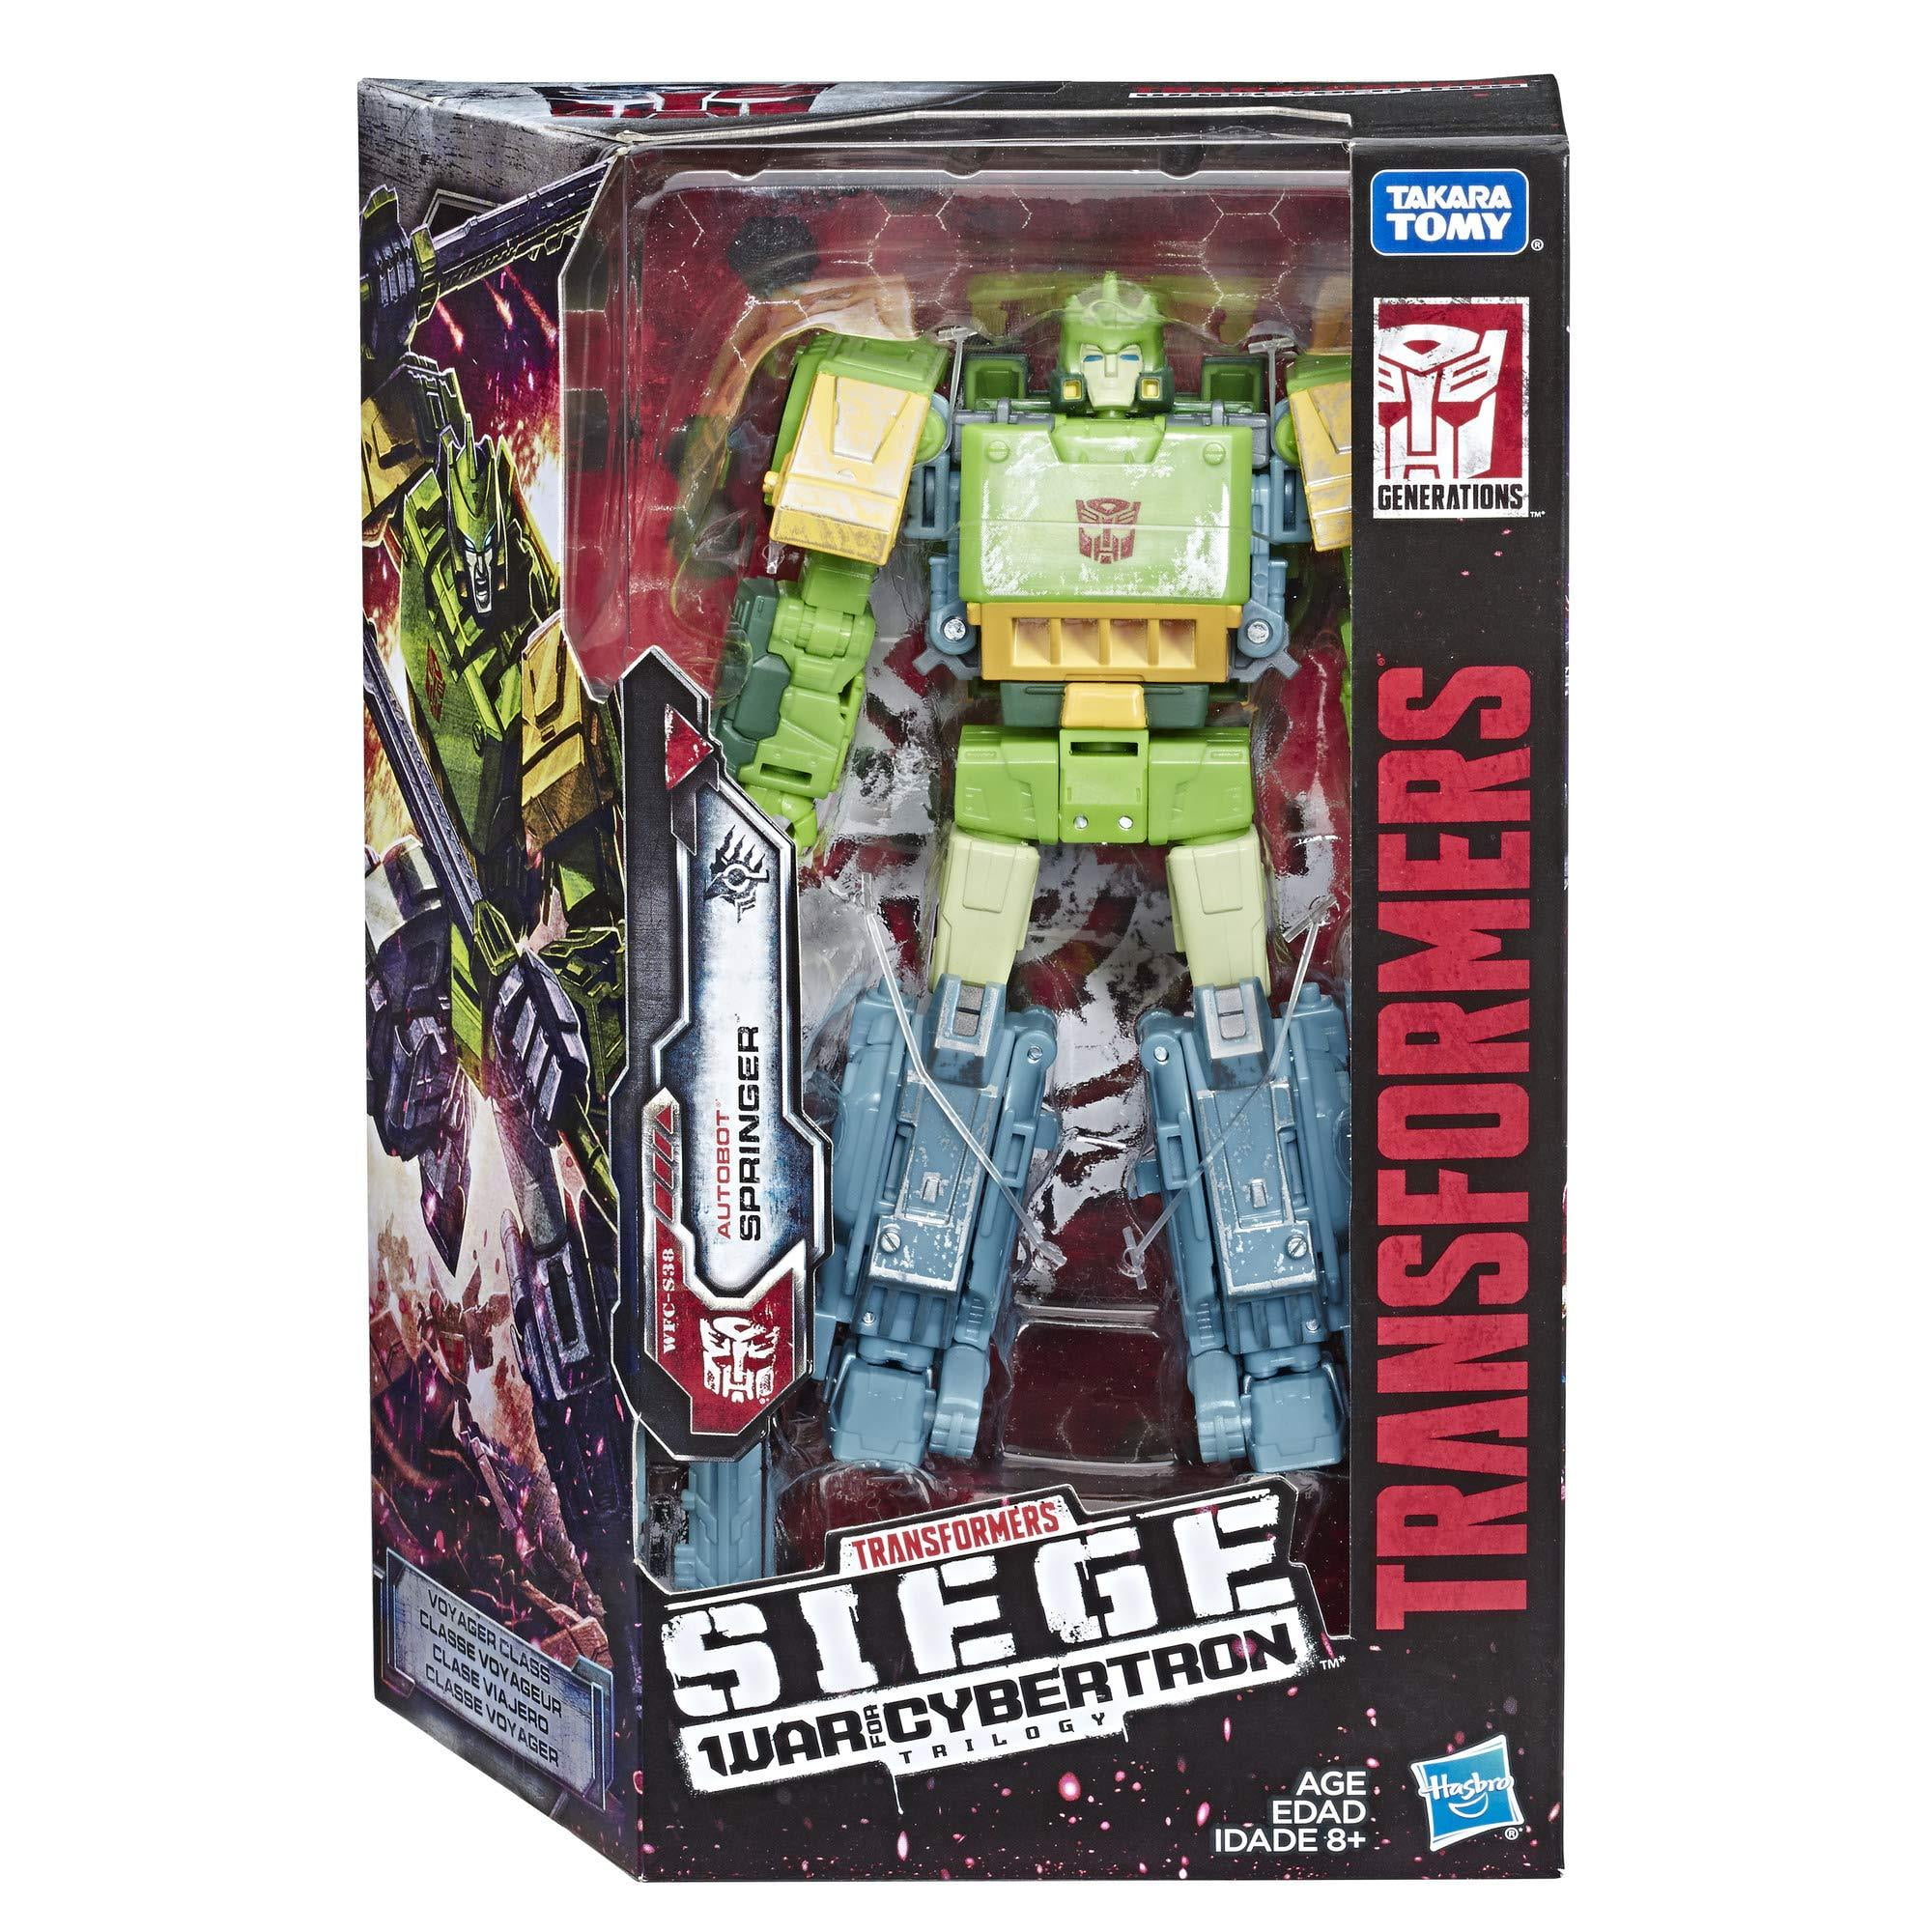 Transformers SIEGE War for Cybertron Green Autobot Springer Action Figure NEW